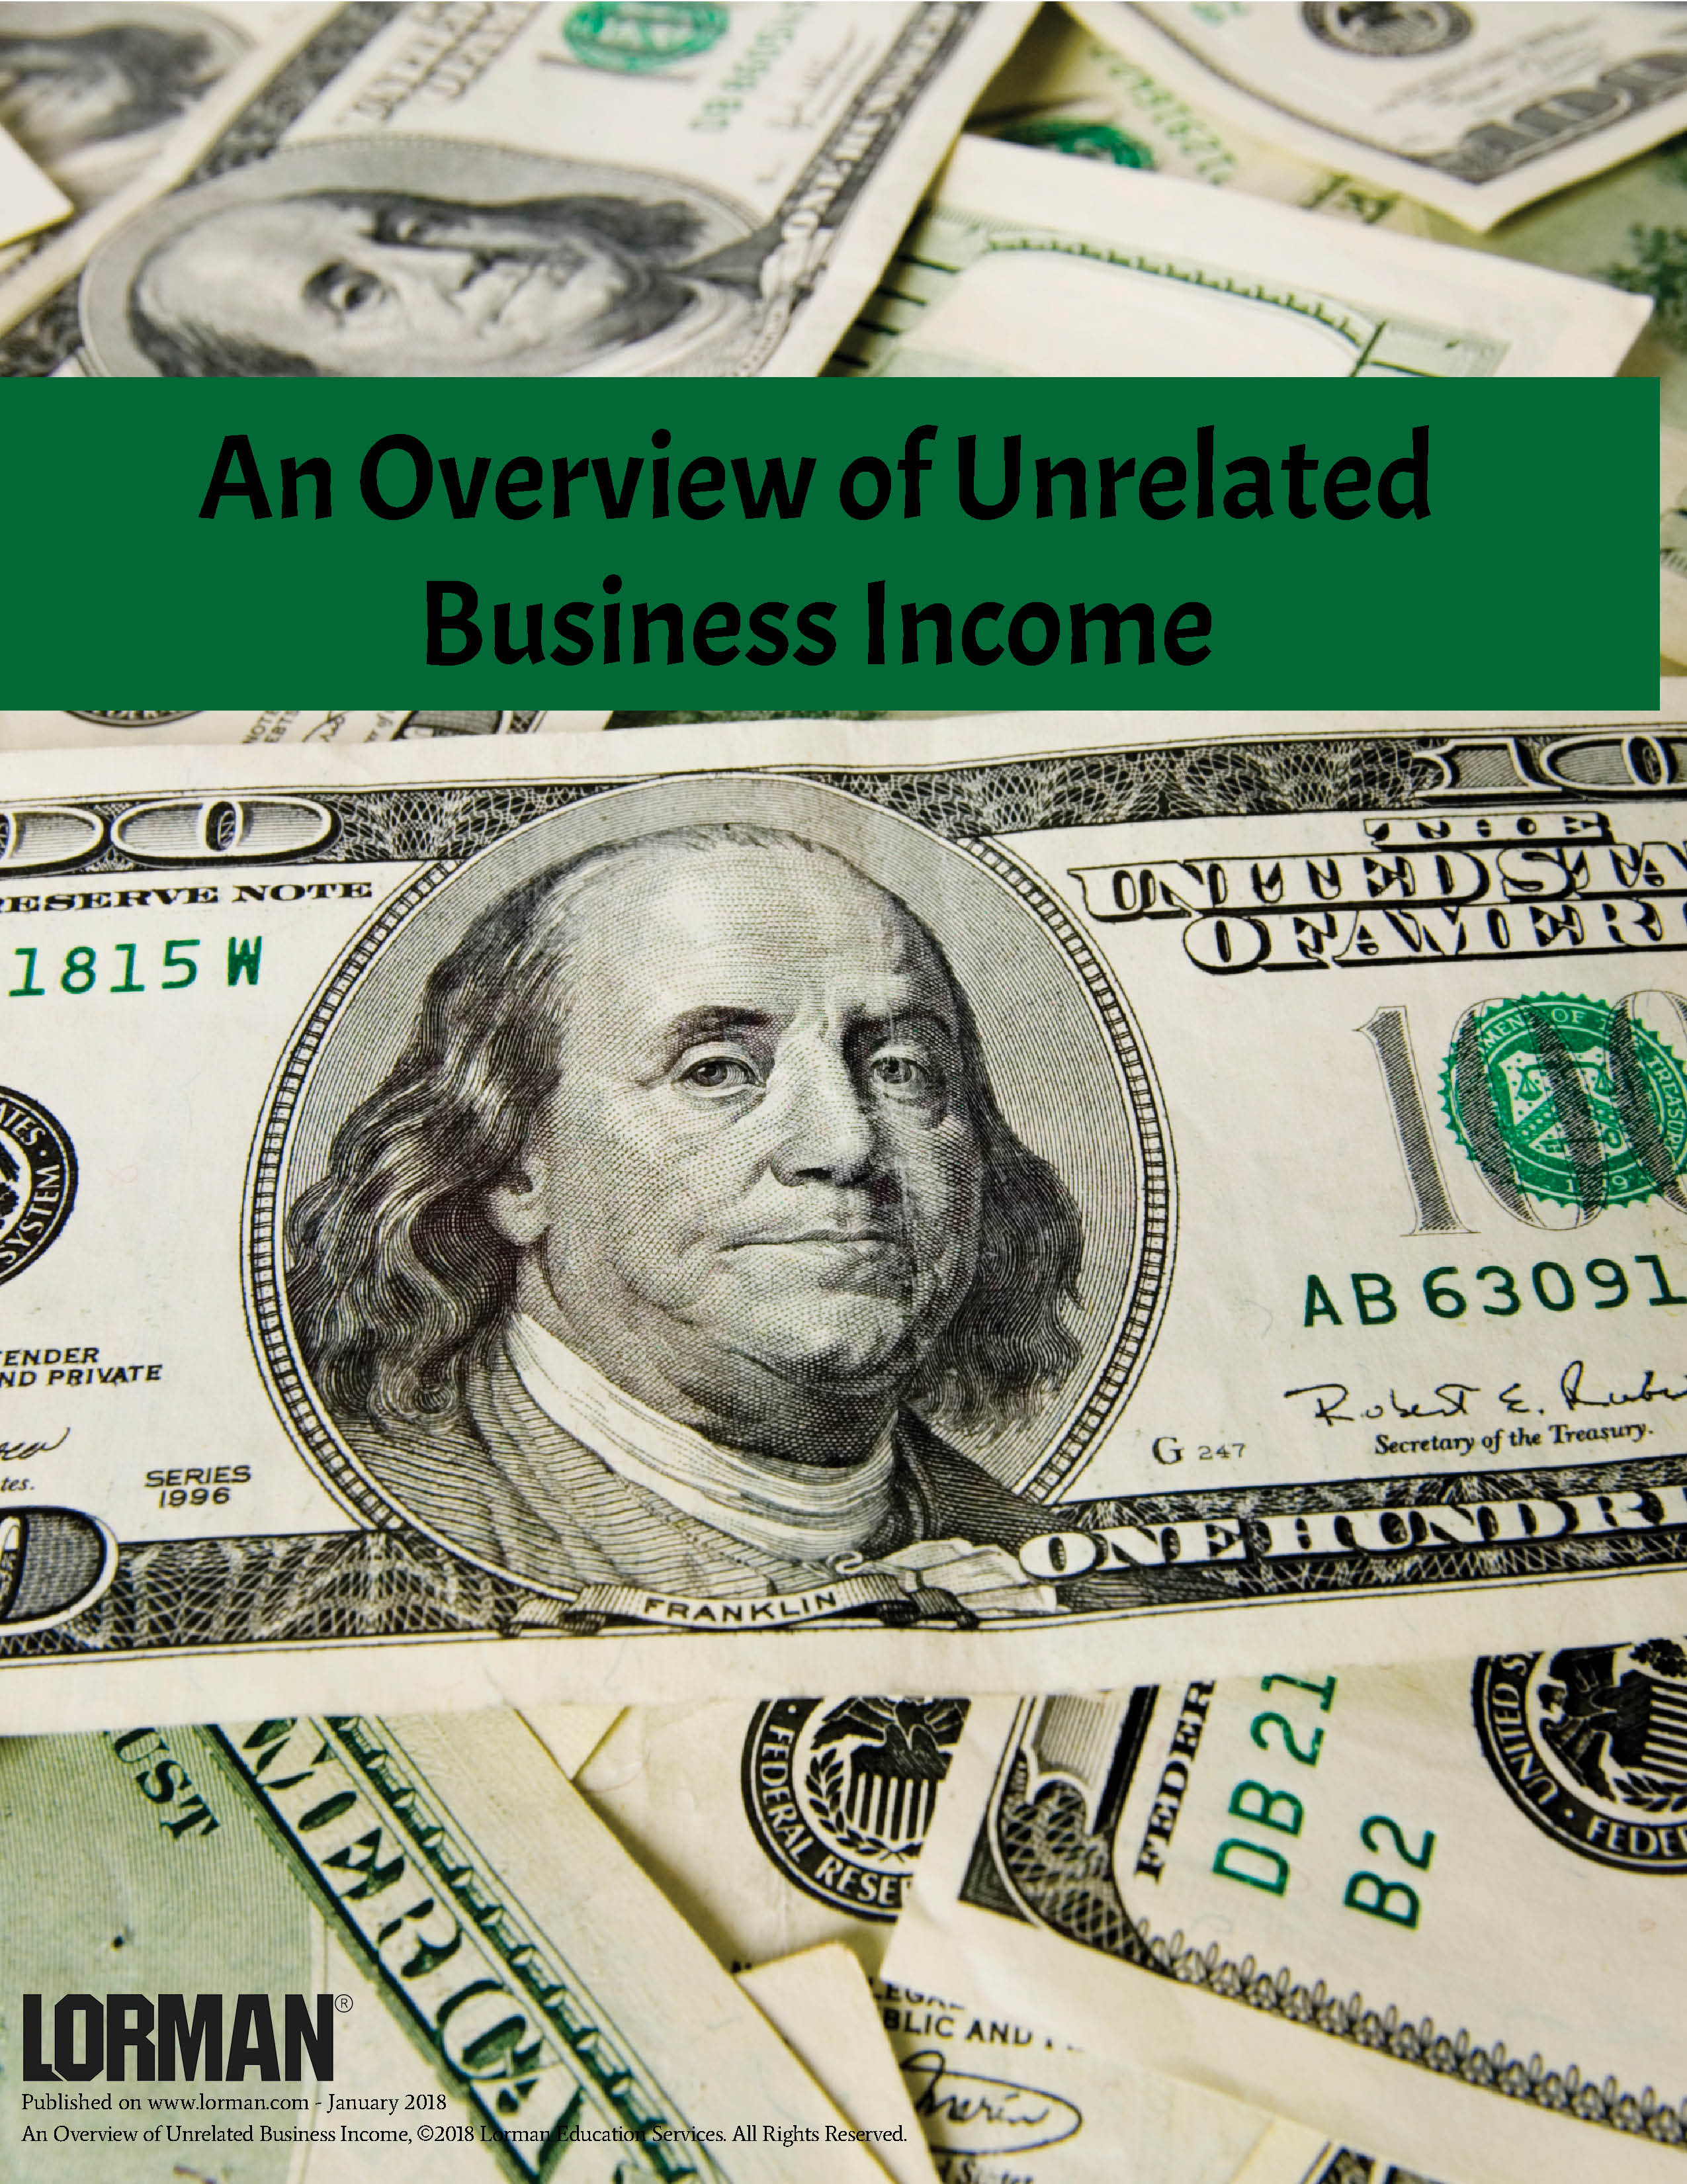 An Overview of Unrelated Business Income